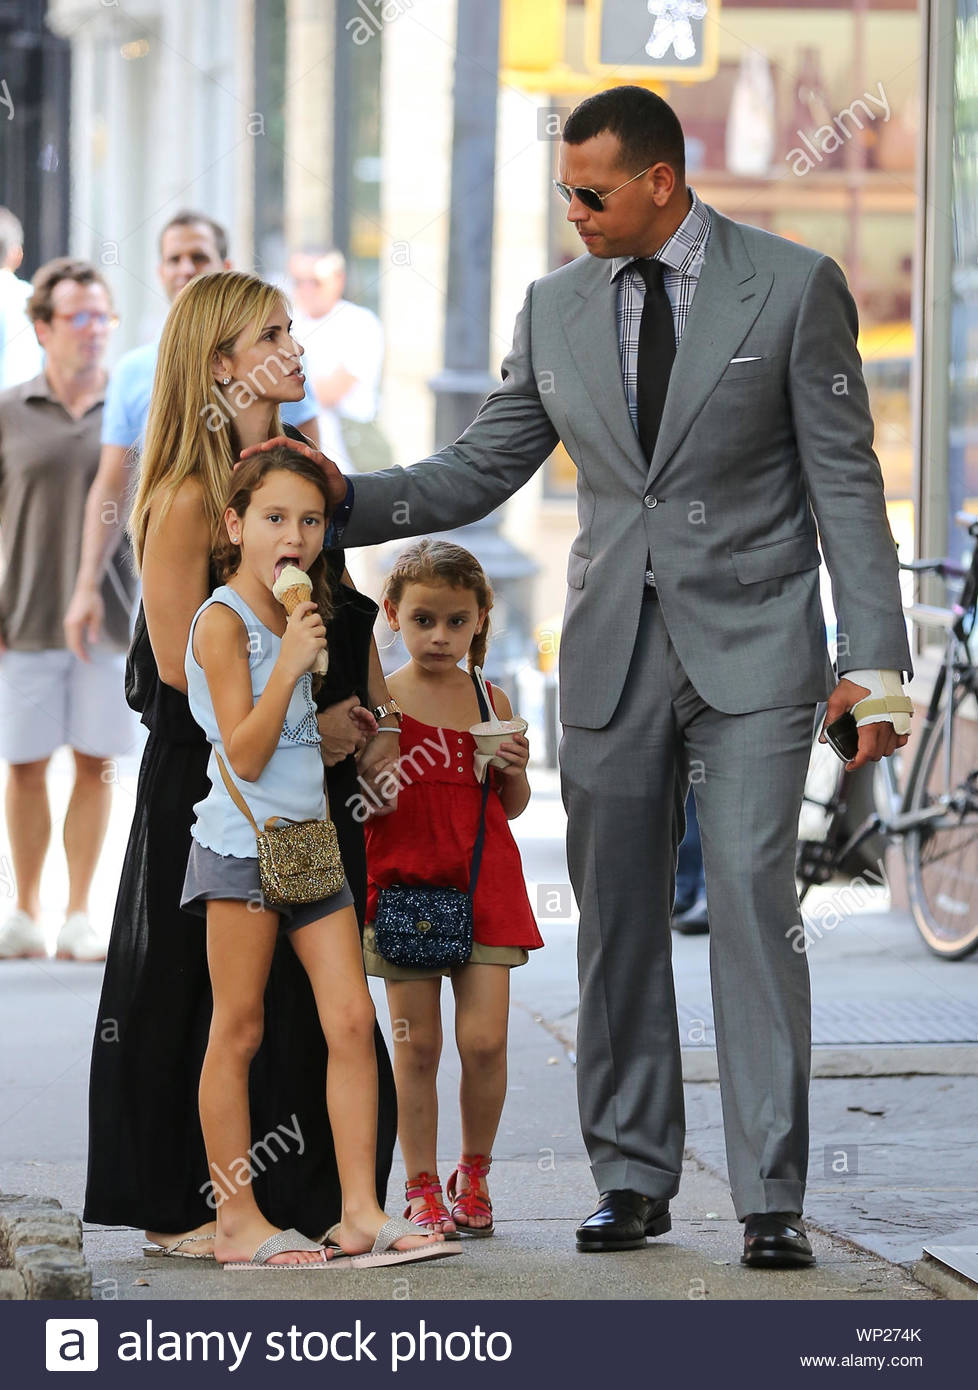 New York Ny Alex Rodriguez Reunites With Ex Wife Cynthia Scurtis And His Girls Natasha And Ella They Stopped For Some Ice Cream On Their Way Back Home A Rod Stopped And